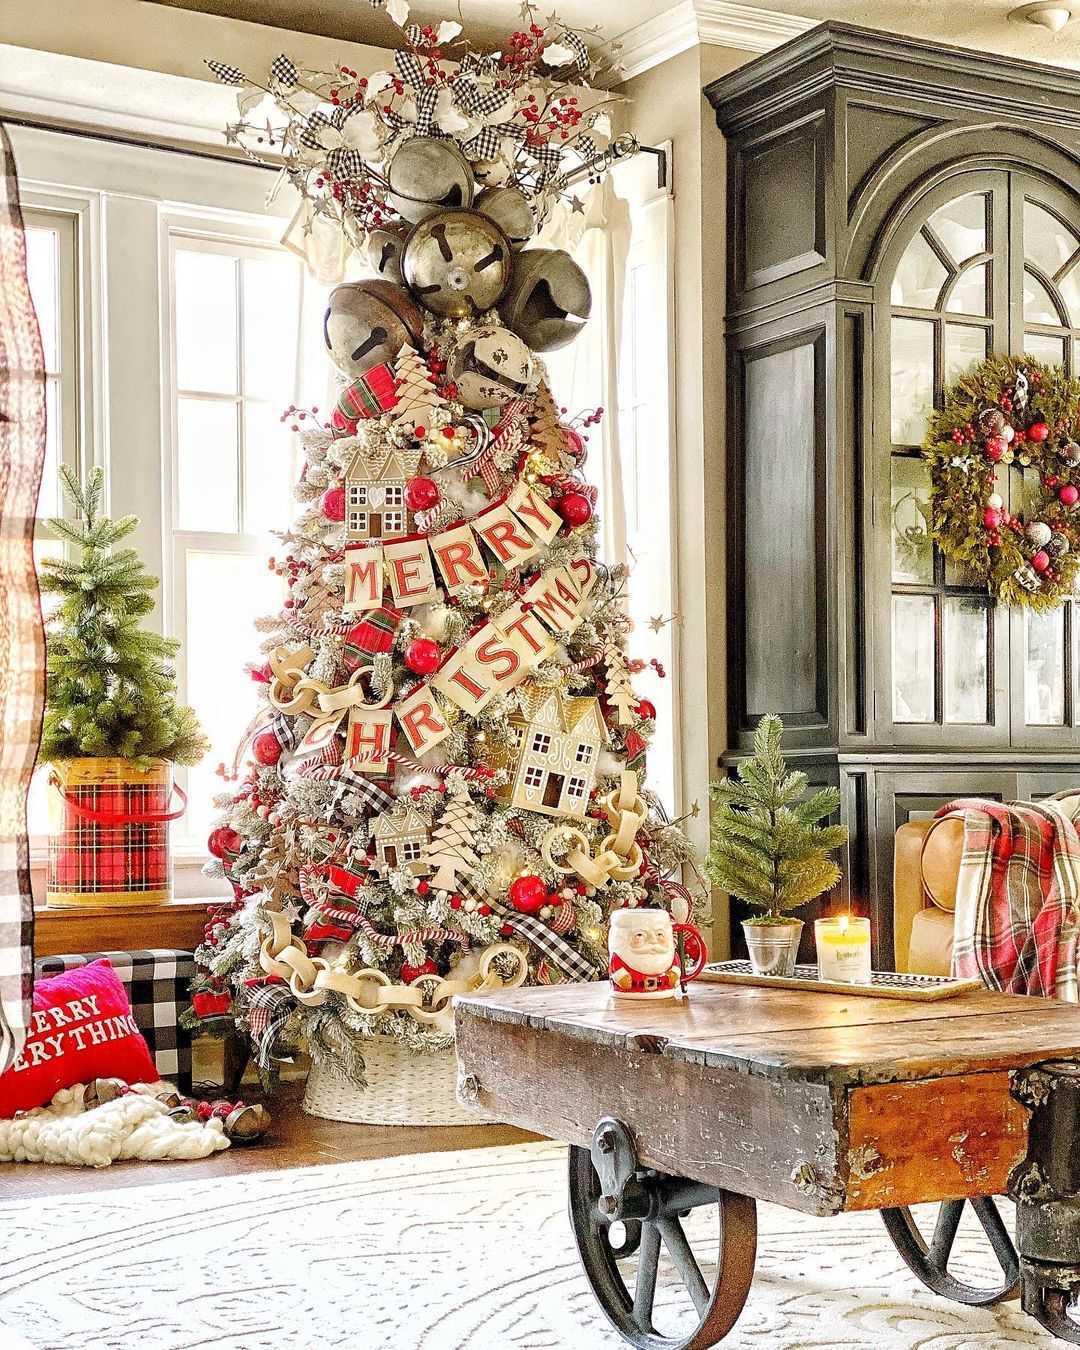 Christmas Bedroom Decor: 10 Ways To Decorate Bedroom At Christmas